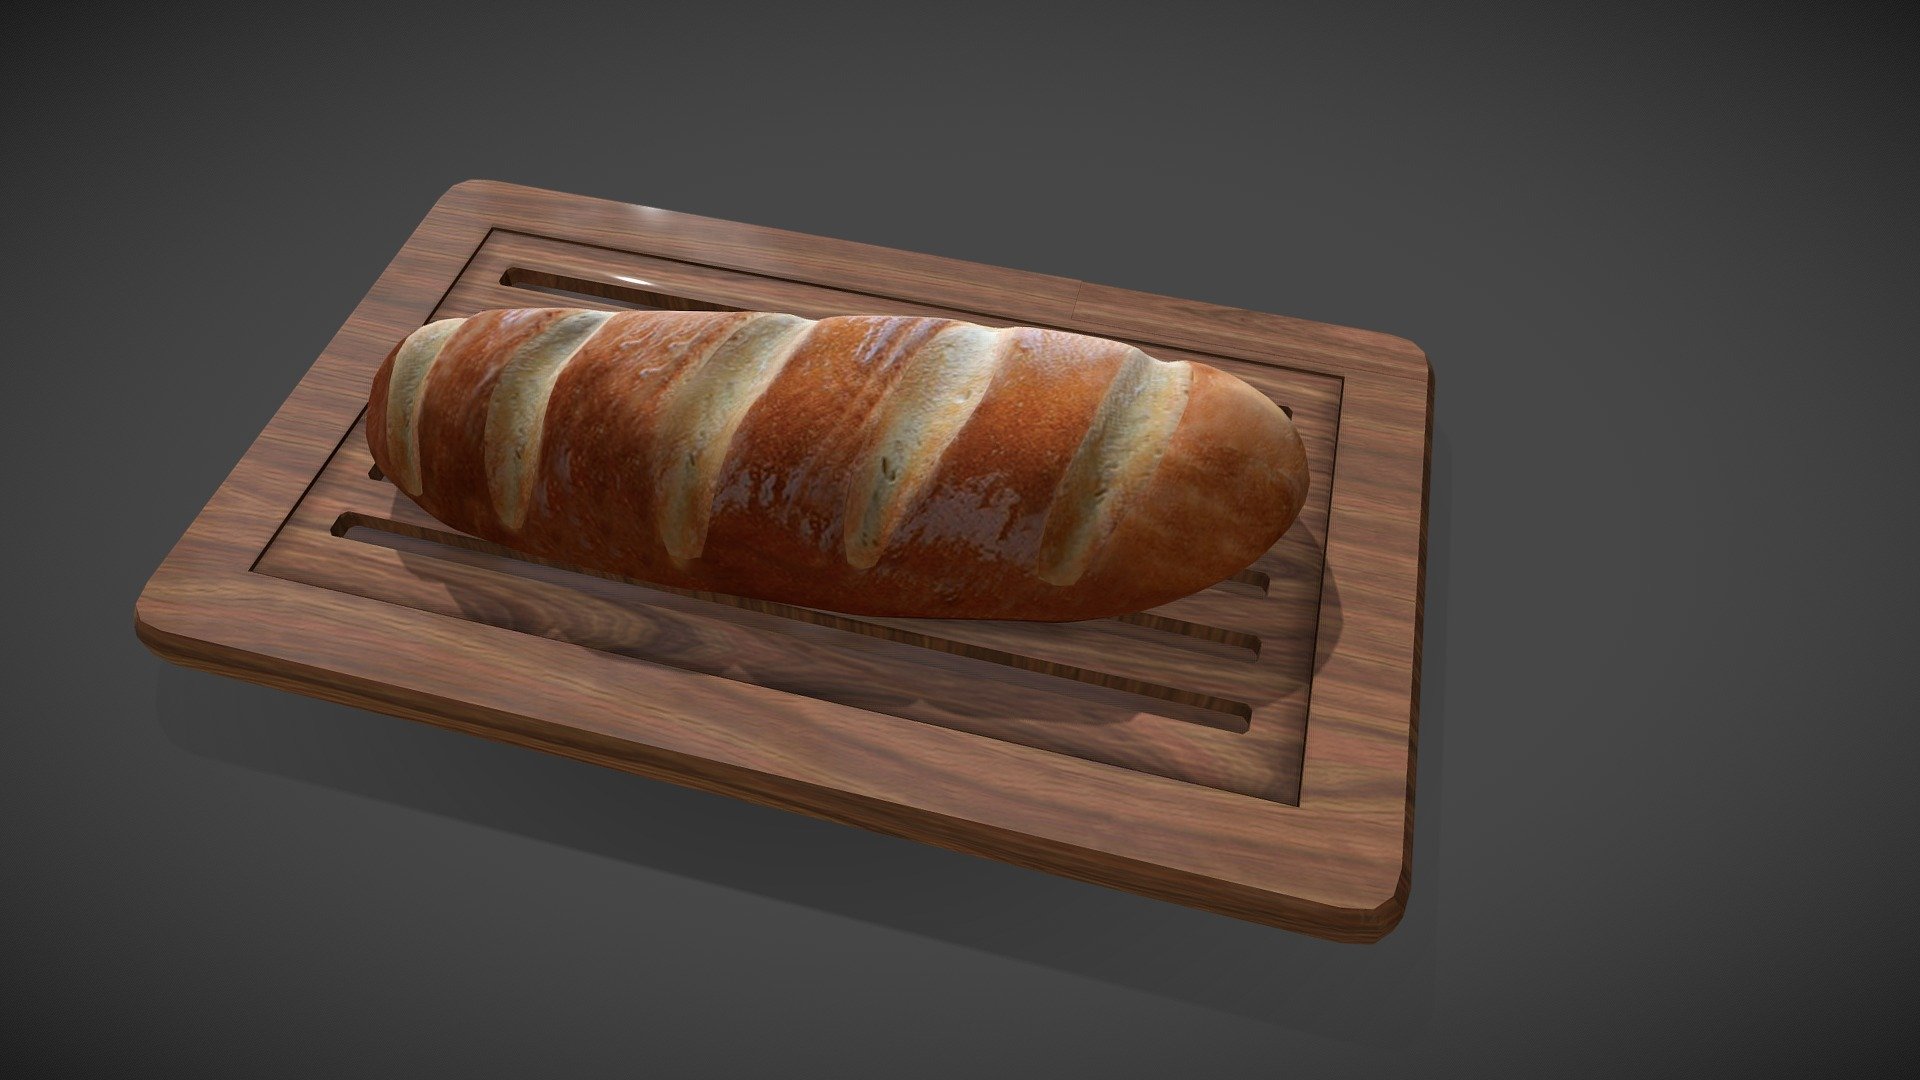 French bread on a bread cutting board, knife included 3d model